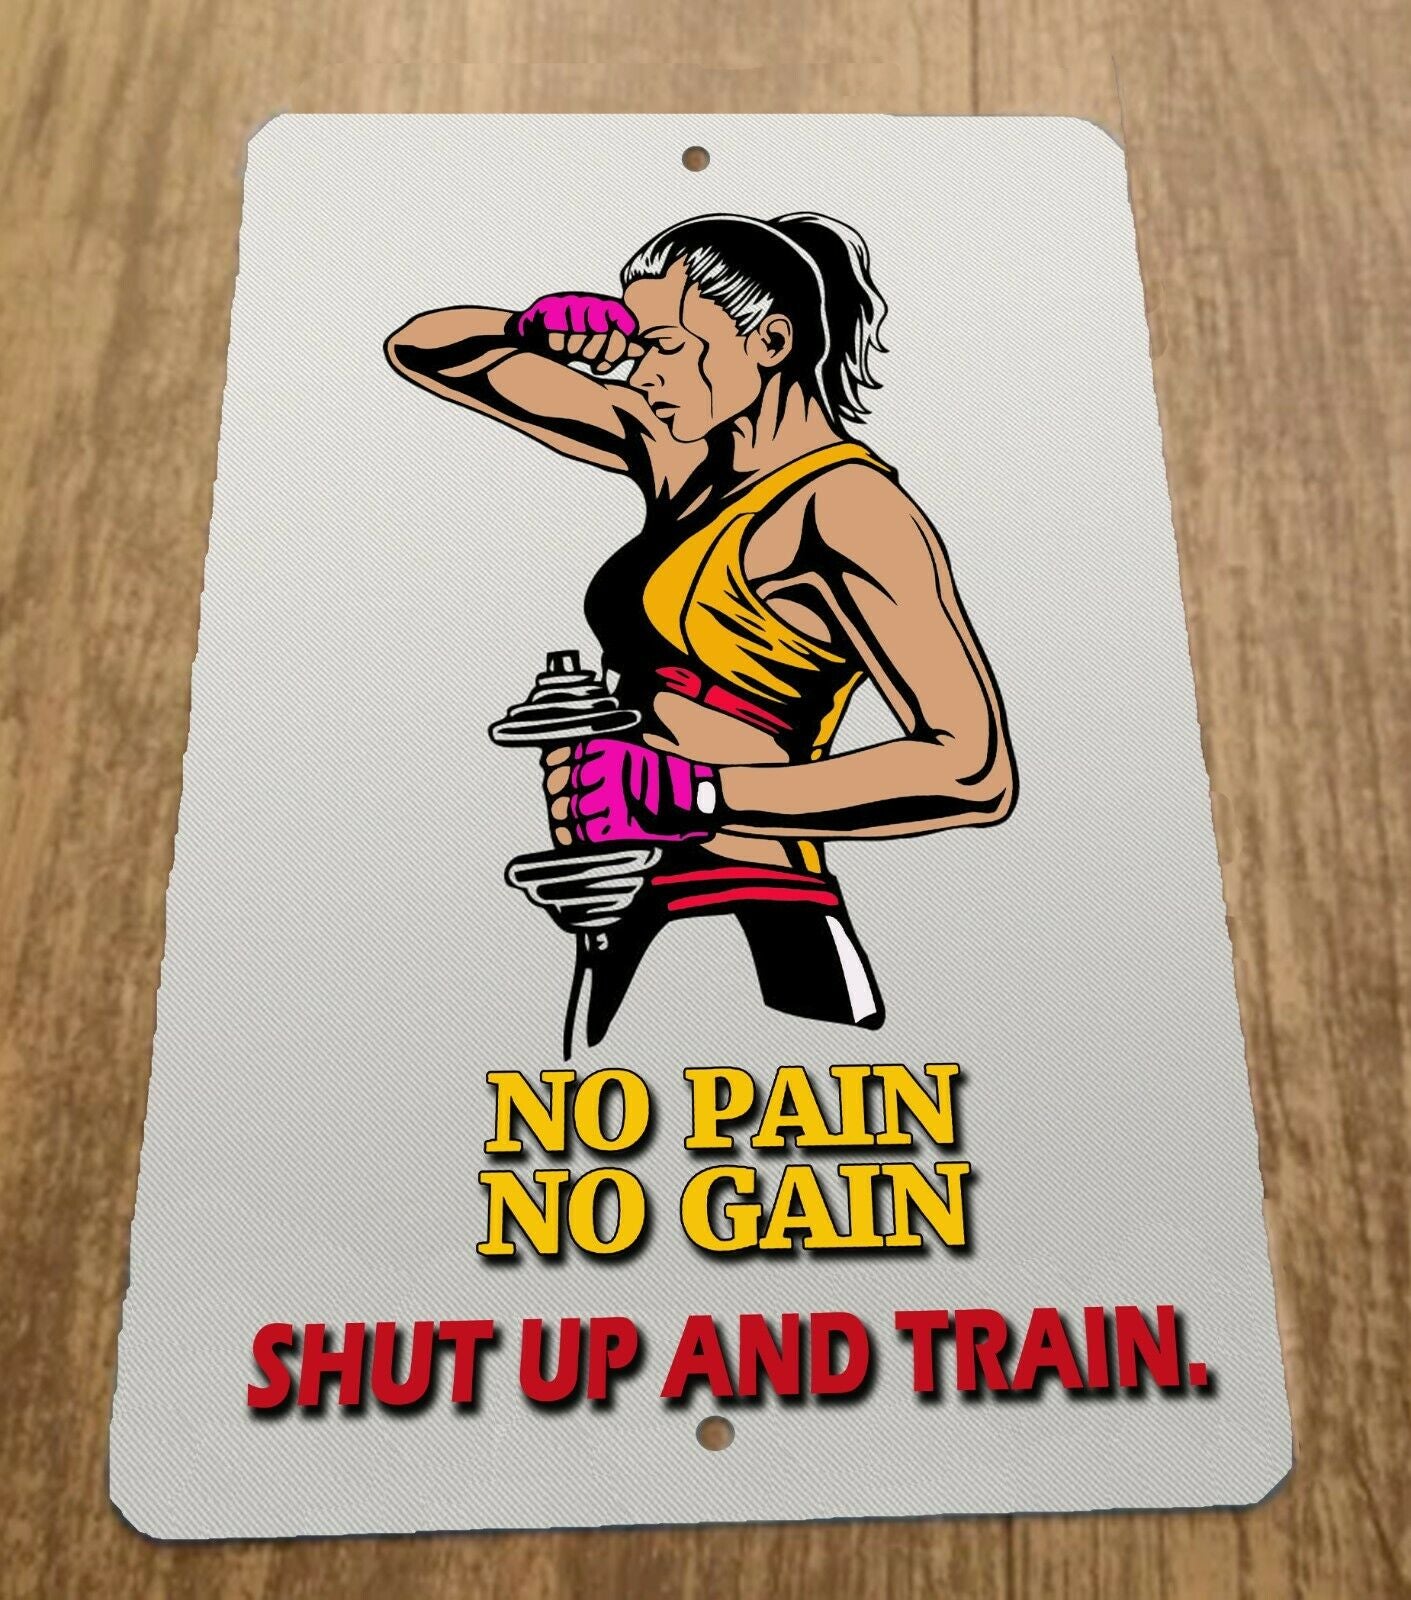 No Pain No Gain Shut up and Train Motivational Women Gym 8x12 Metal Wall Sign Misc Poster Quotes Workout